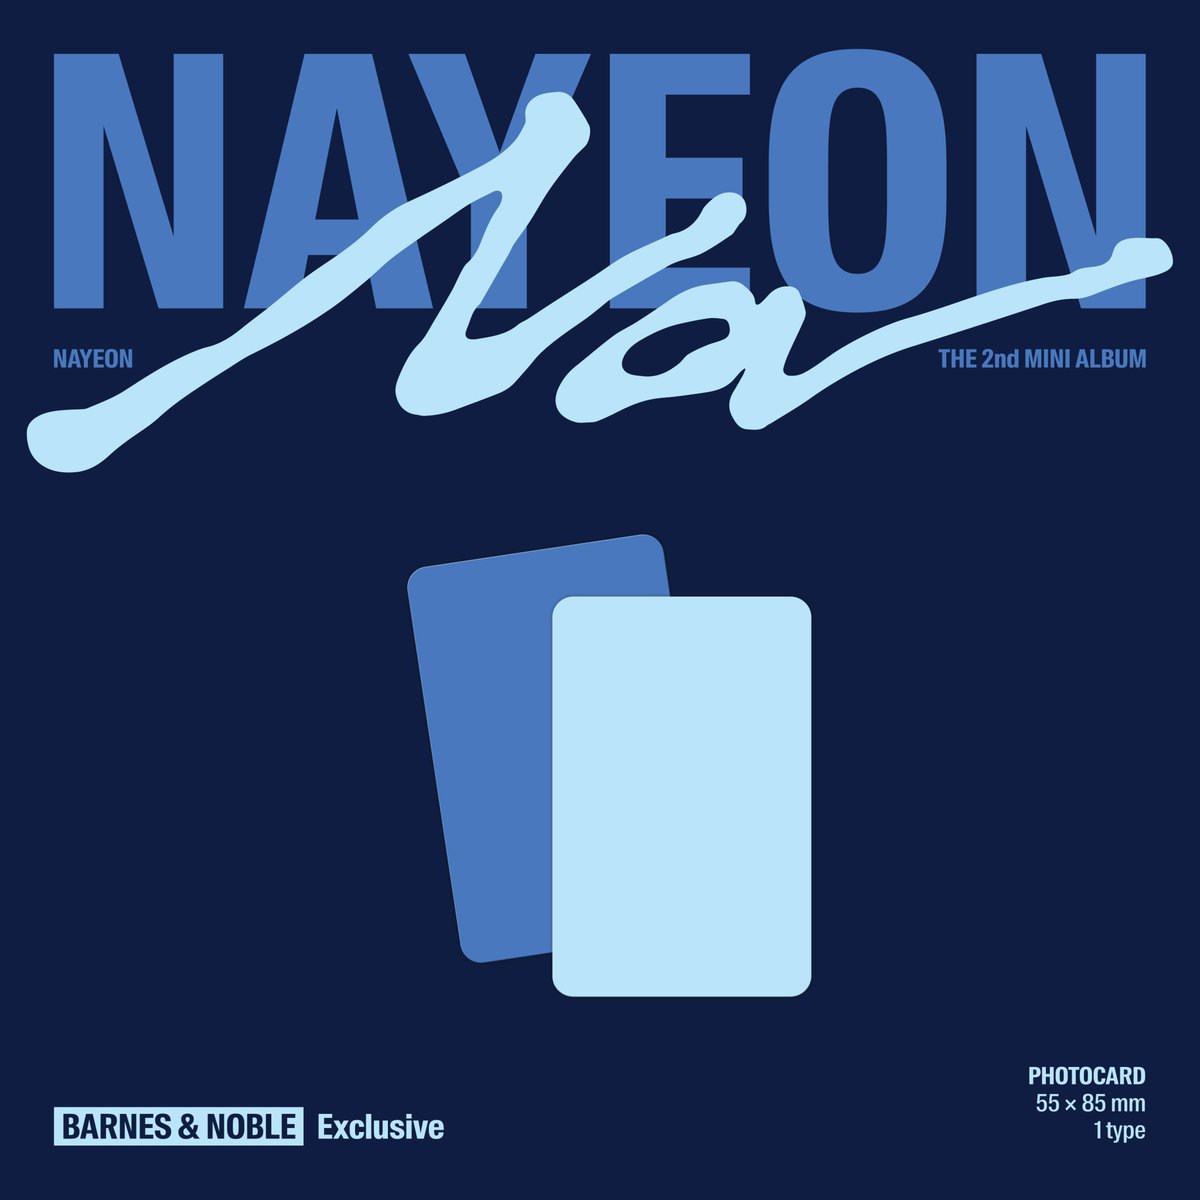 NAYEON THE 2nd MINI ALBUM 〖NA〗 🔔Physical Pre-Order 🔗Barnes & Noble (w/Exclusive Photocard) ‘A’ ver.: NAYEON.lnk.to/NAYEON_NA/Barn… ‘B’ ver.: NAYEON.lnk.to/NAYEON_NA/Barn… ‘C’ ver.: NAYEON.lnk.to/NAYEON_NA/Barn… ✰ 〖NA〗 Pre-Save & Pre-Order ✰ NAYEON.lnk.to/NAYEON_NA ➮ Release on